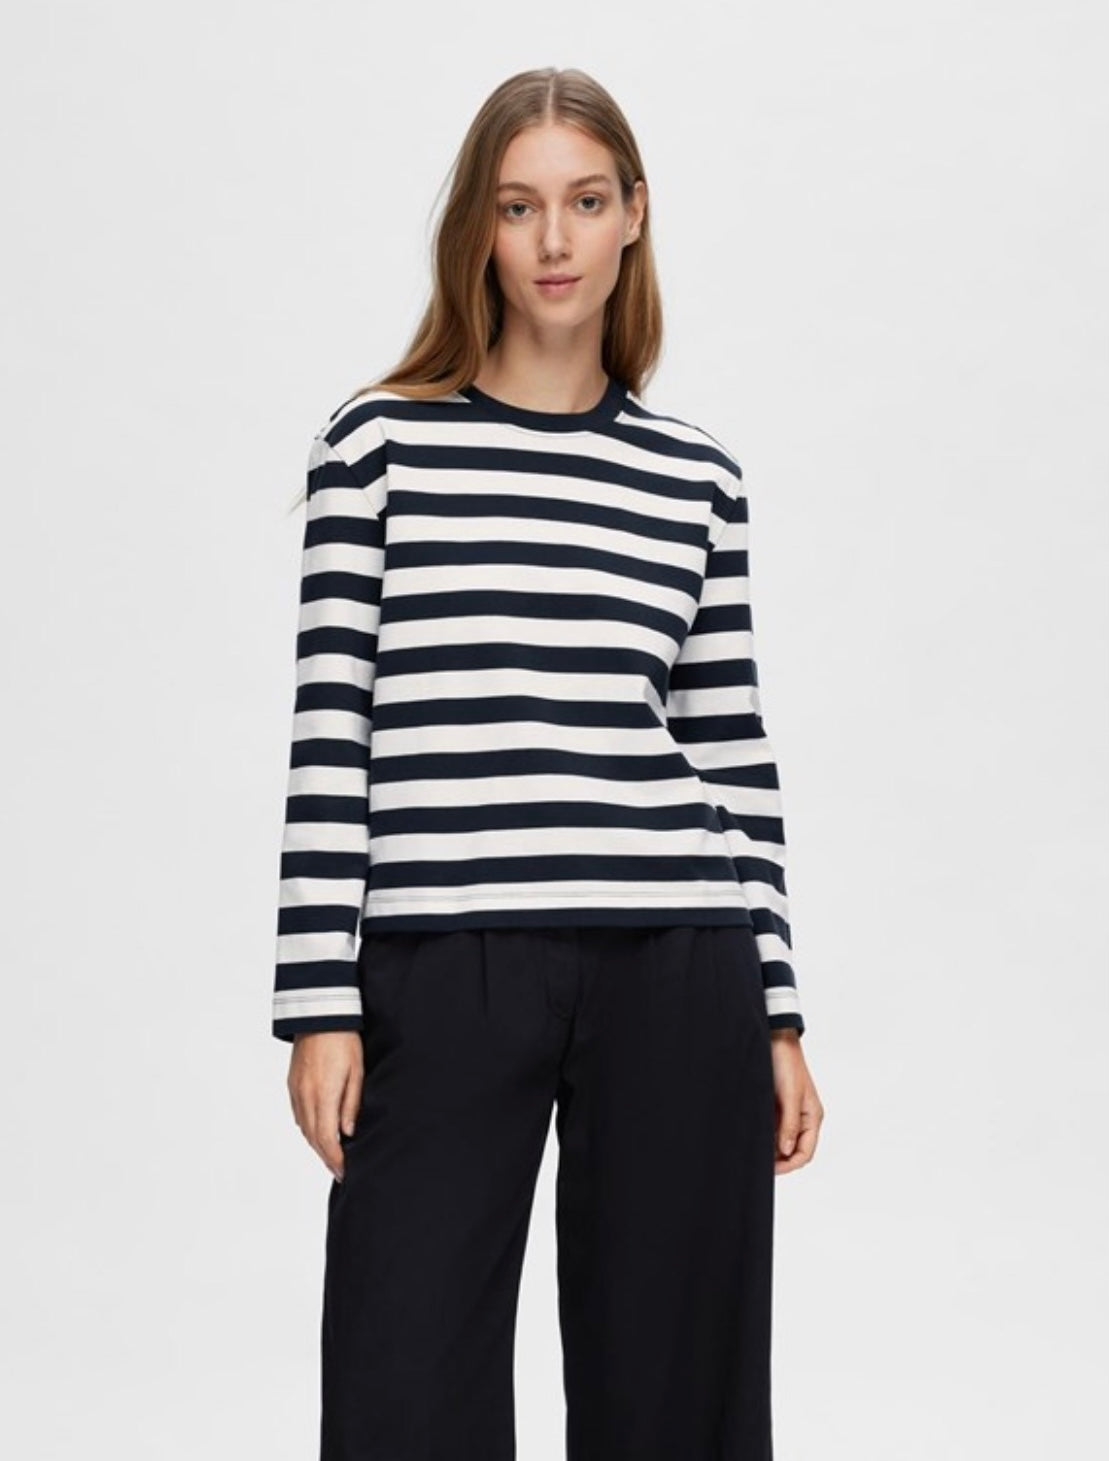 SELECTED FEMME - ESSENTIAL LS STRIPED BOXY TEE - DARK SAPPHIRE/BRIGHT WHITE